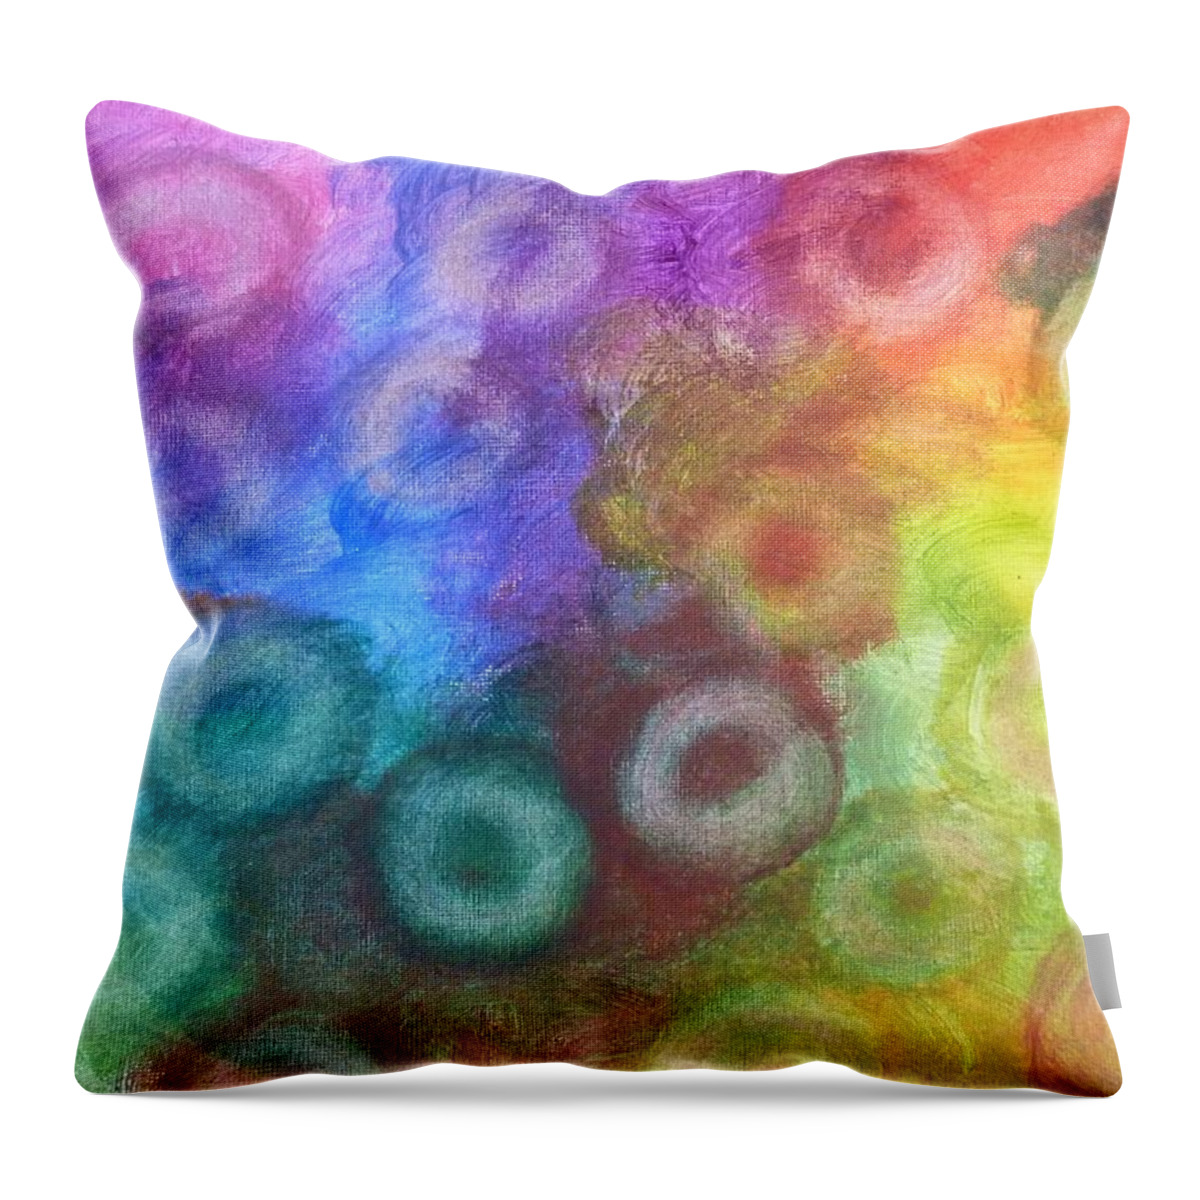 Polychromatic Rbc's Throw Pillow featuring the painting Polychromatic RBC's by Amelie Simmons